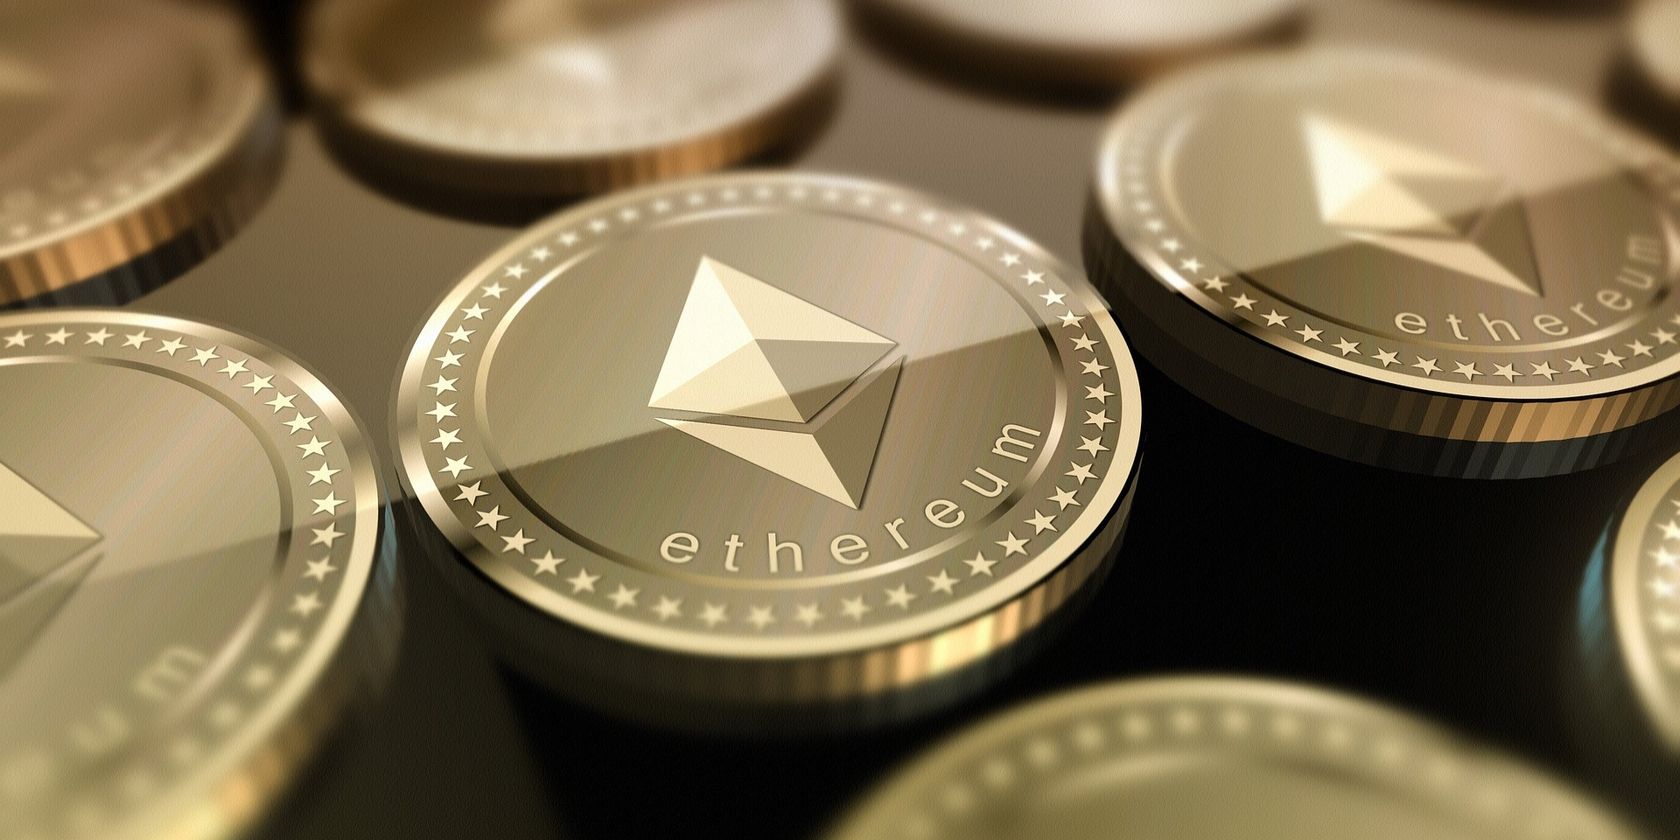 a picture showing Ethereum tokens